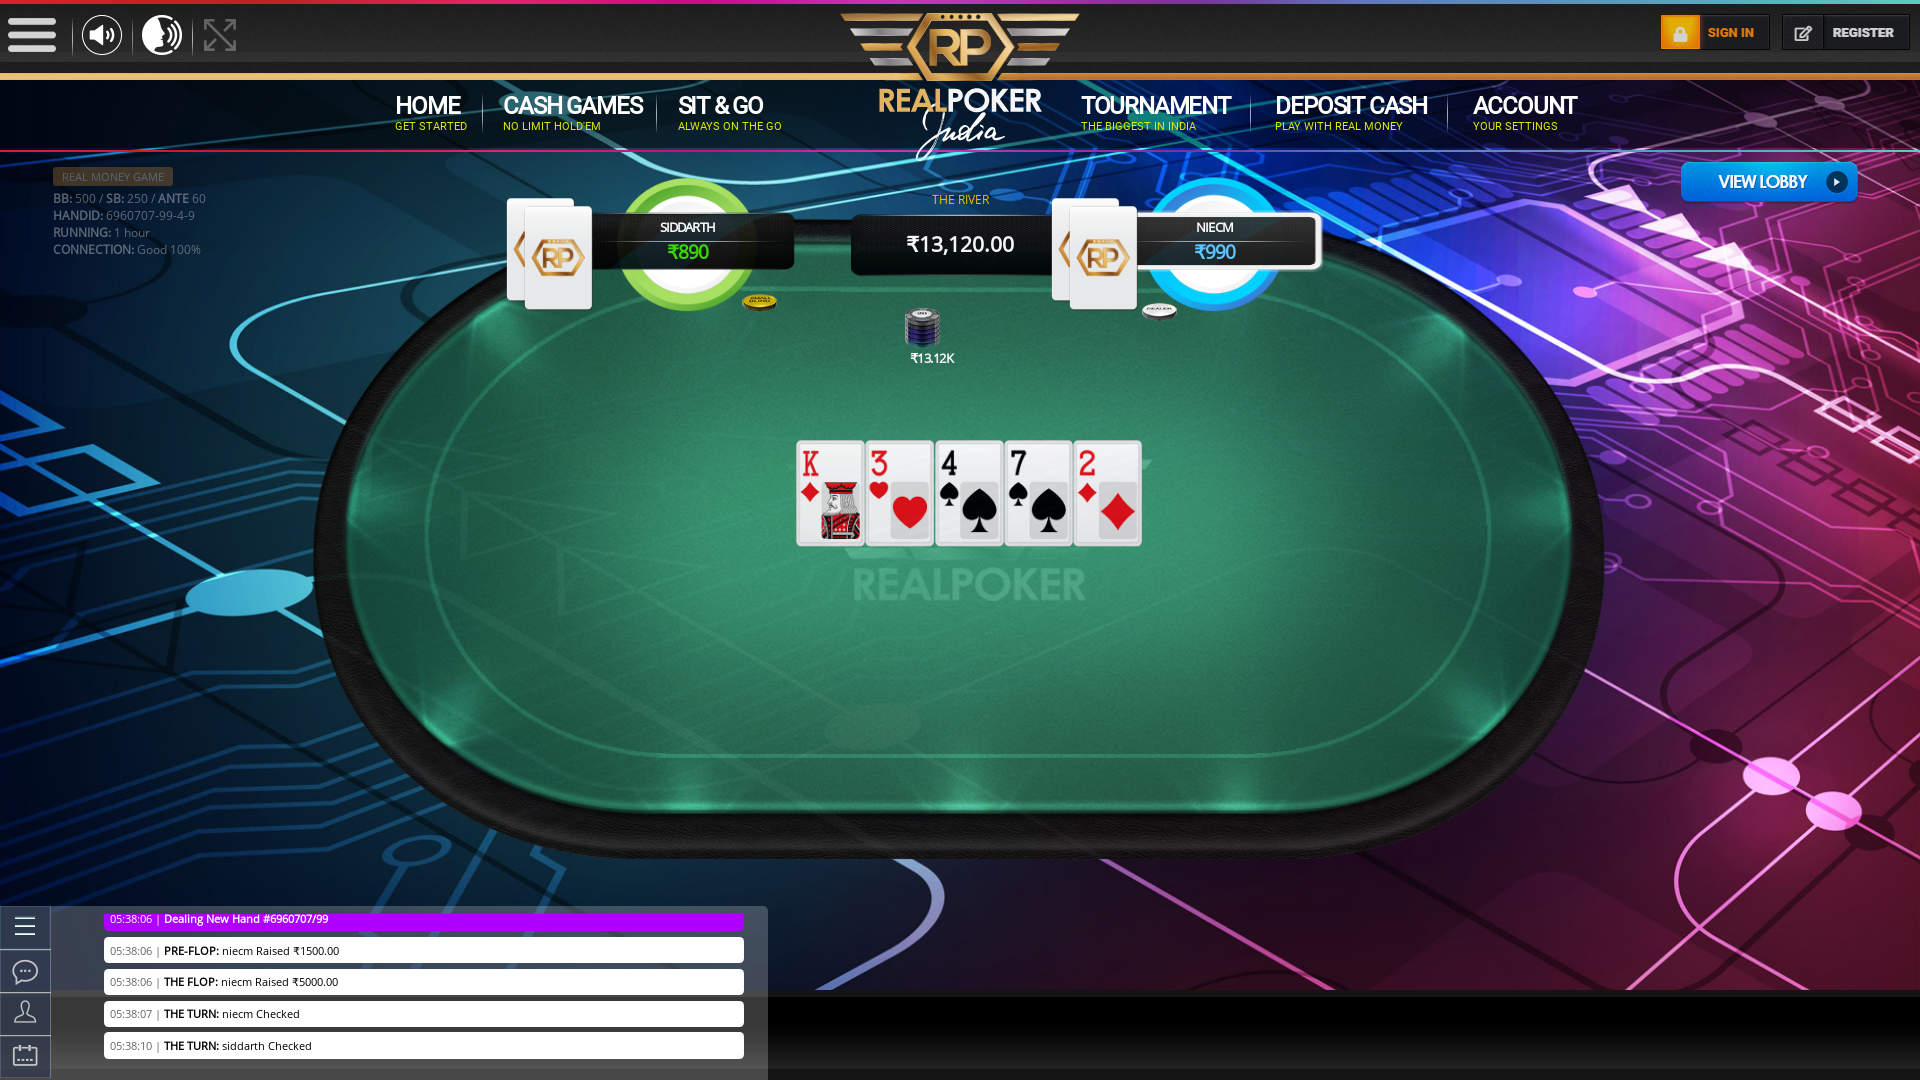 Mandovi River poker table on a 10 player table in the 66th minute